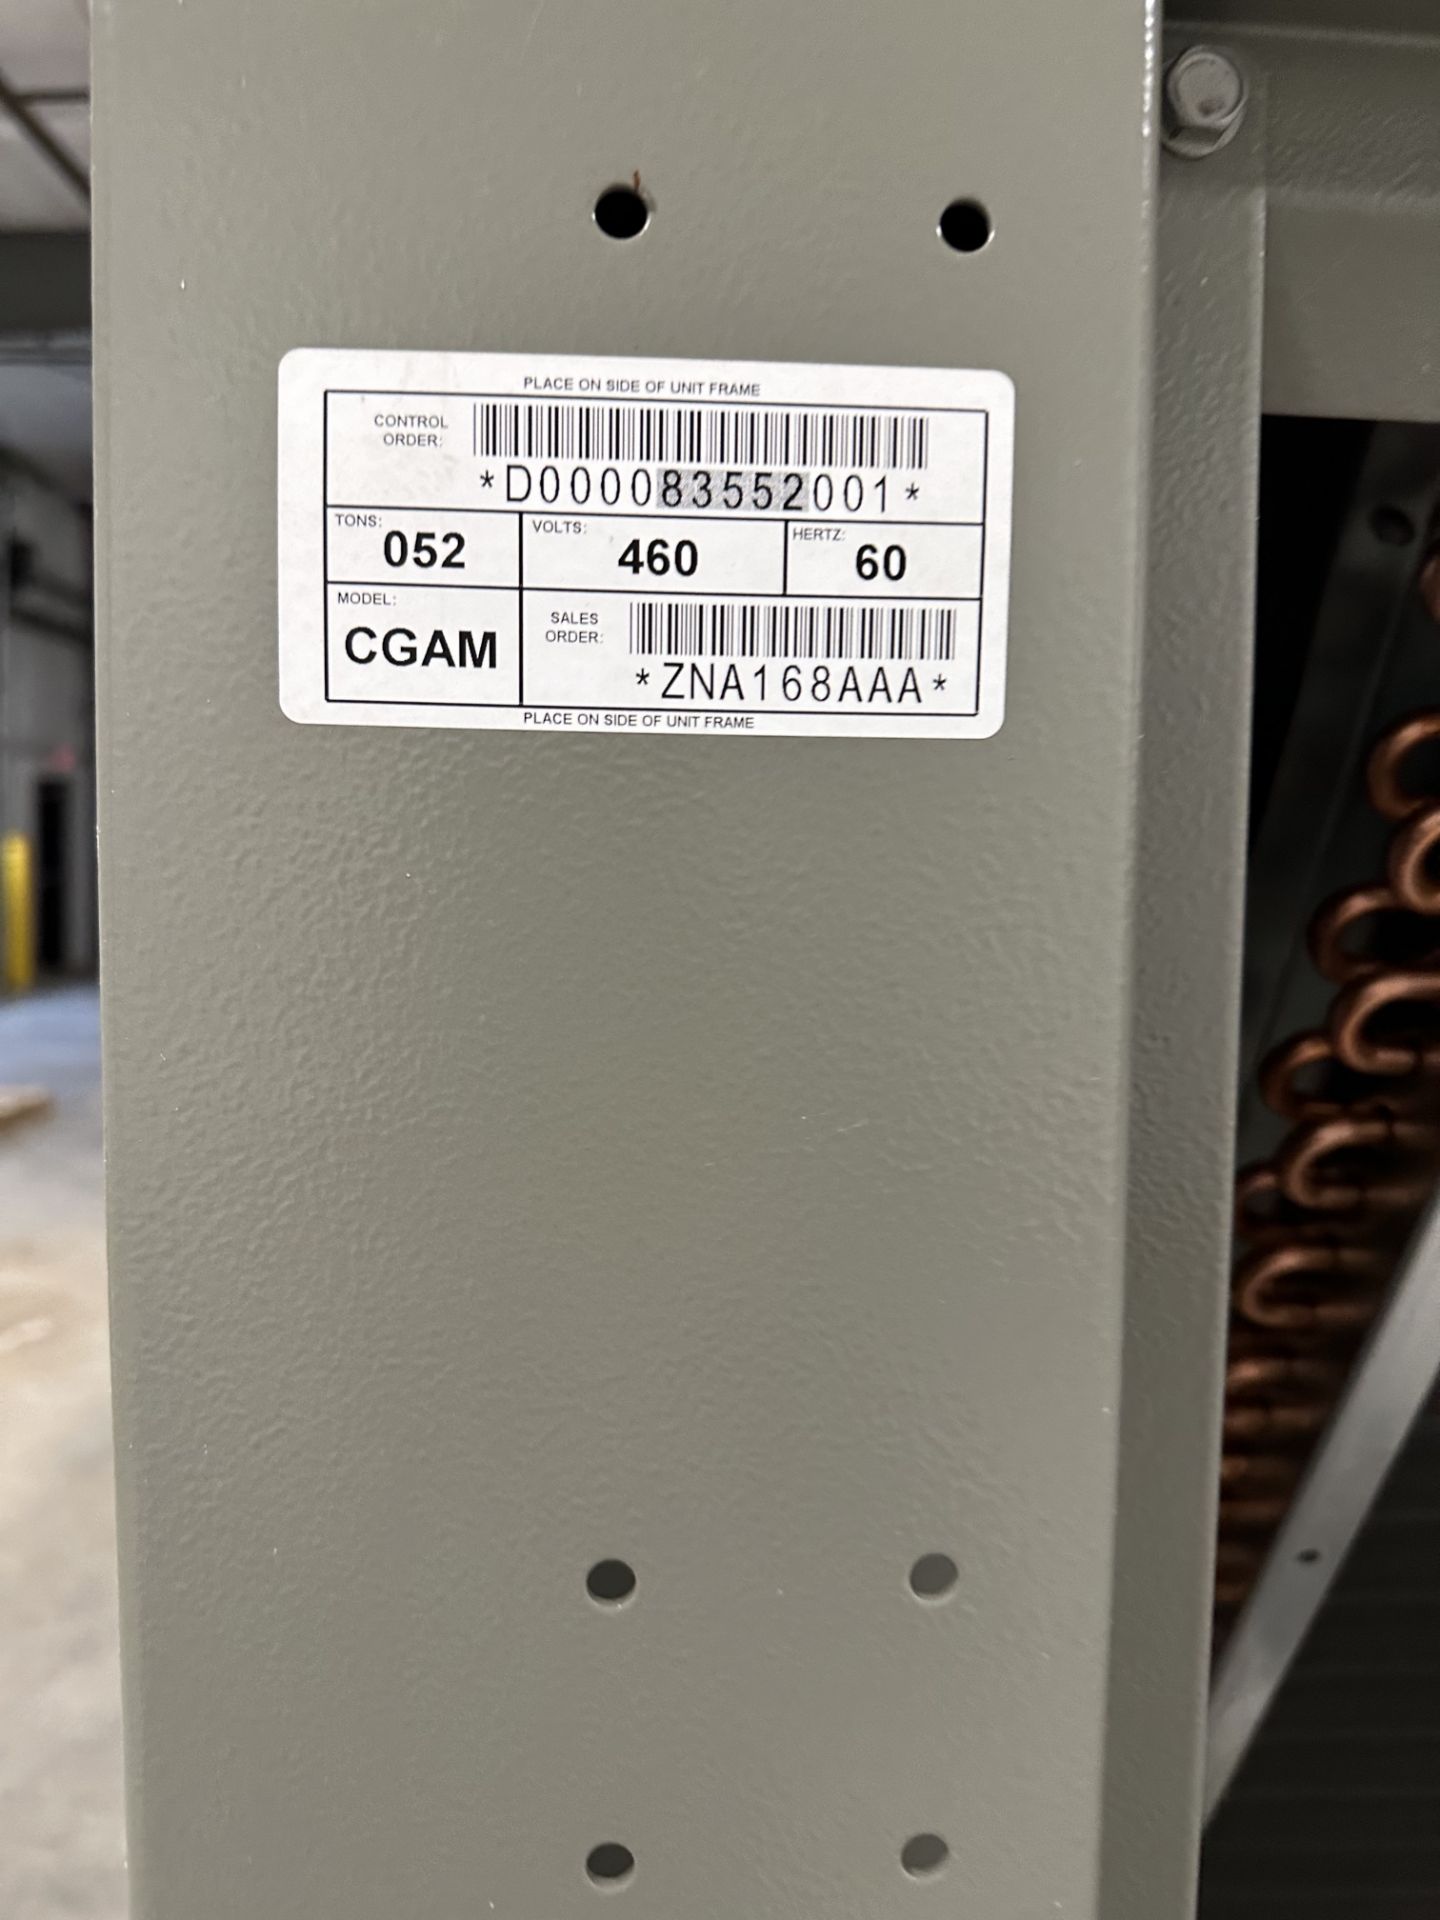 Used Trane Air-Cooled Scroll Chillers. Model CGAM “V”Configuration. - Image 11 of 24